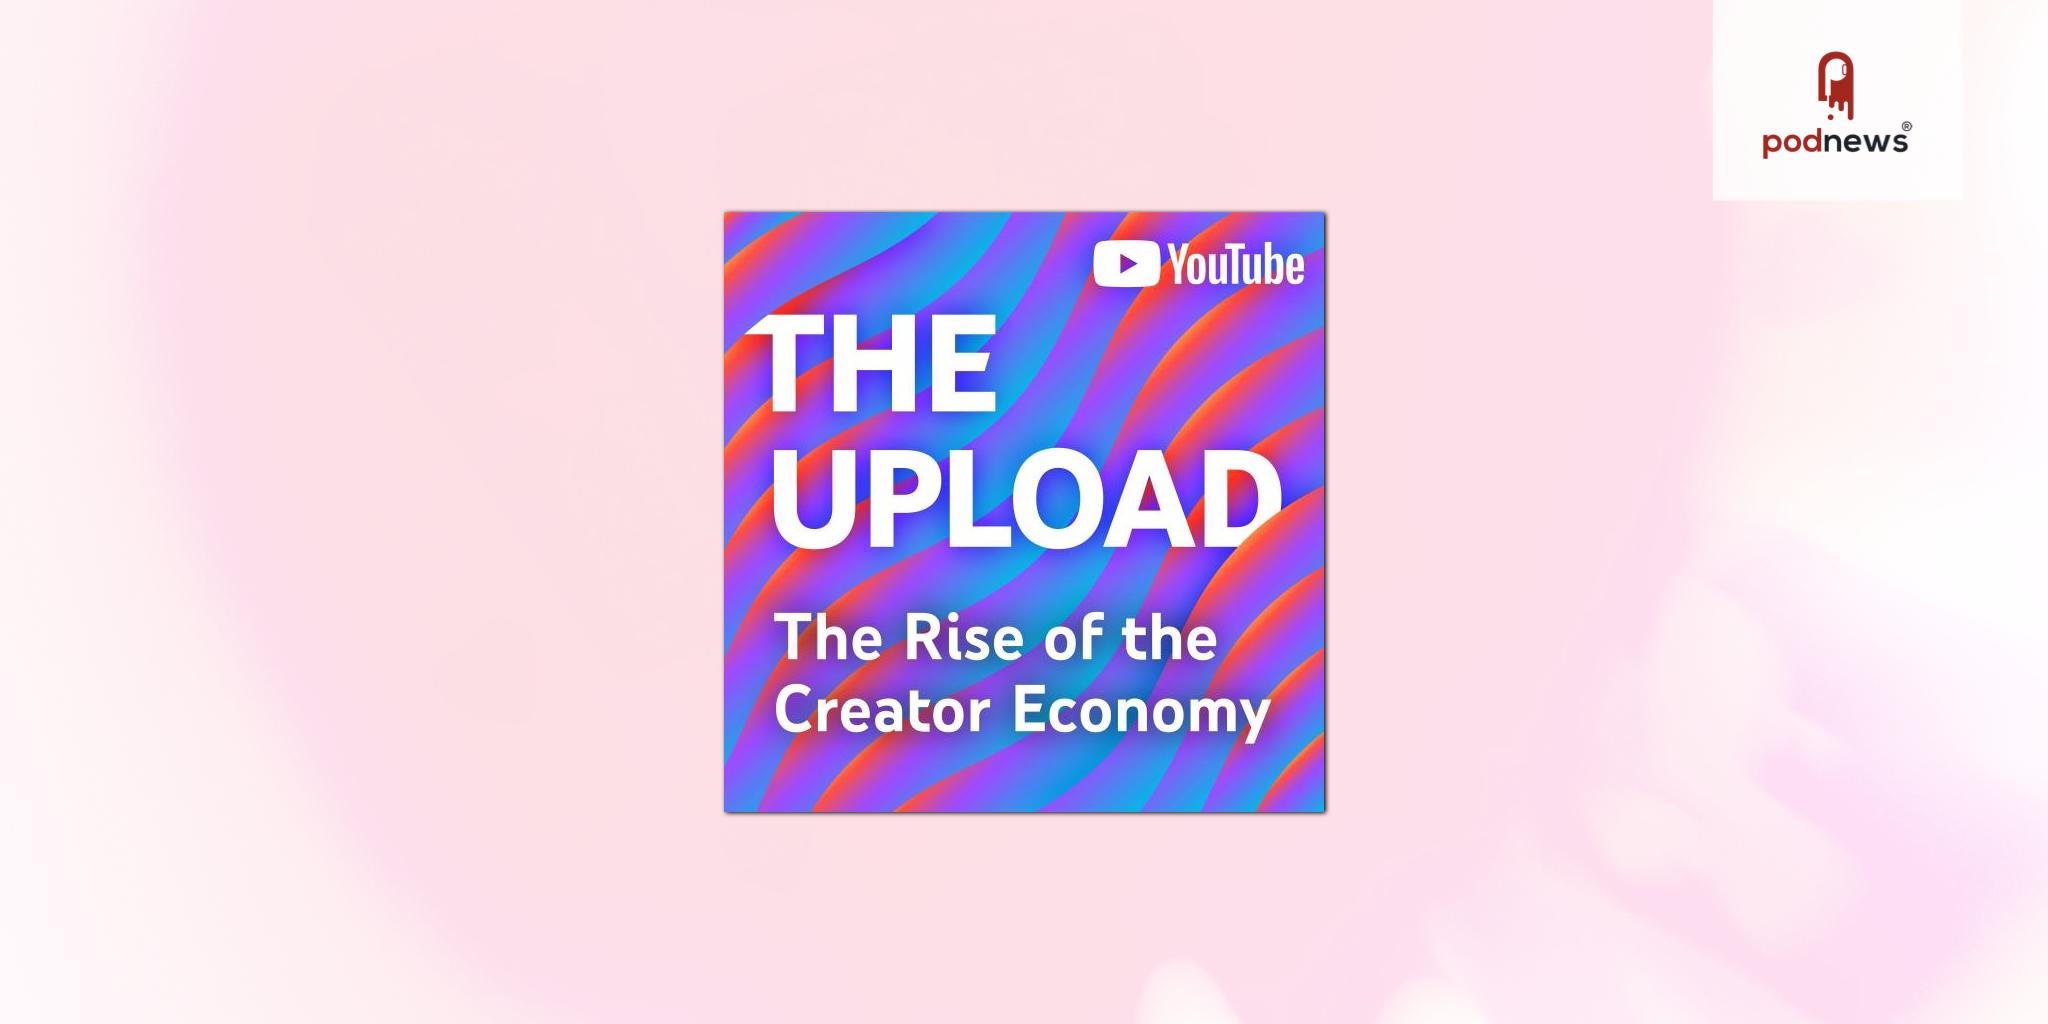 YouTube and National Public Media Announce Custom Podcast The Upload: The Rise of the Creator Economy